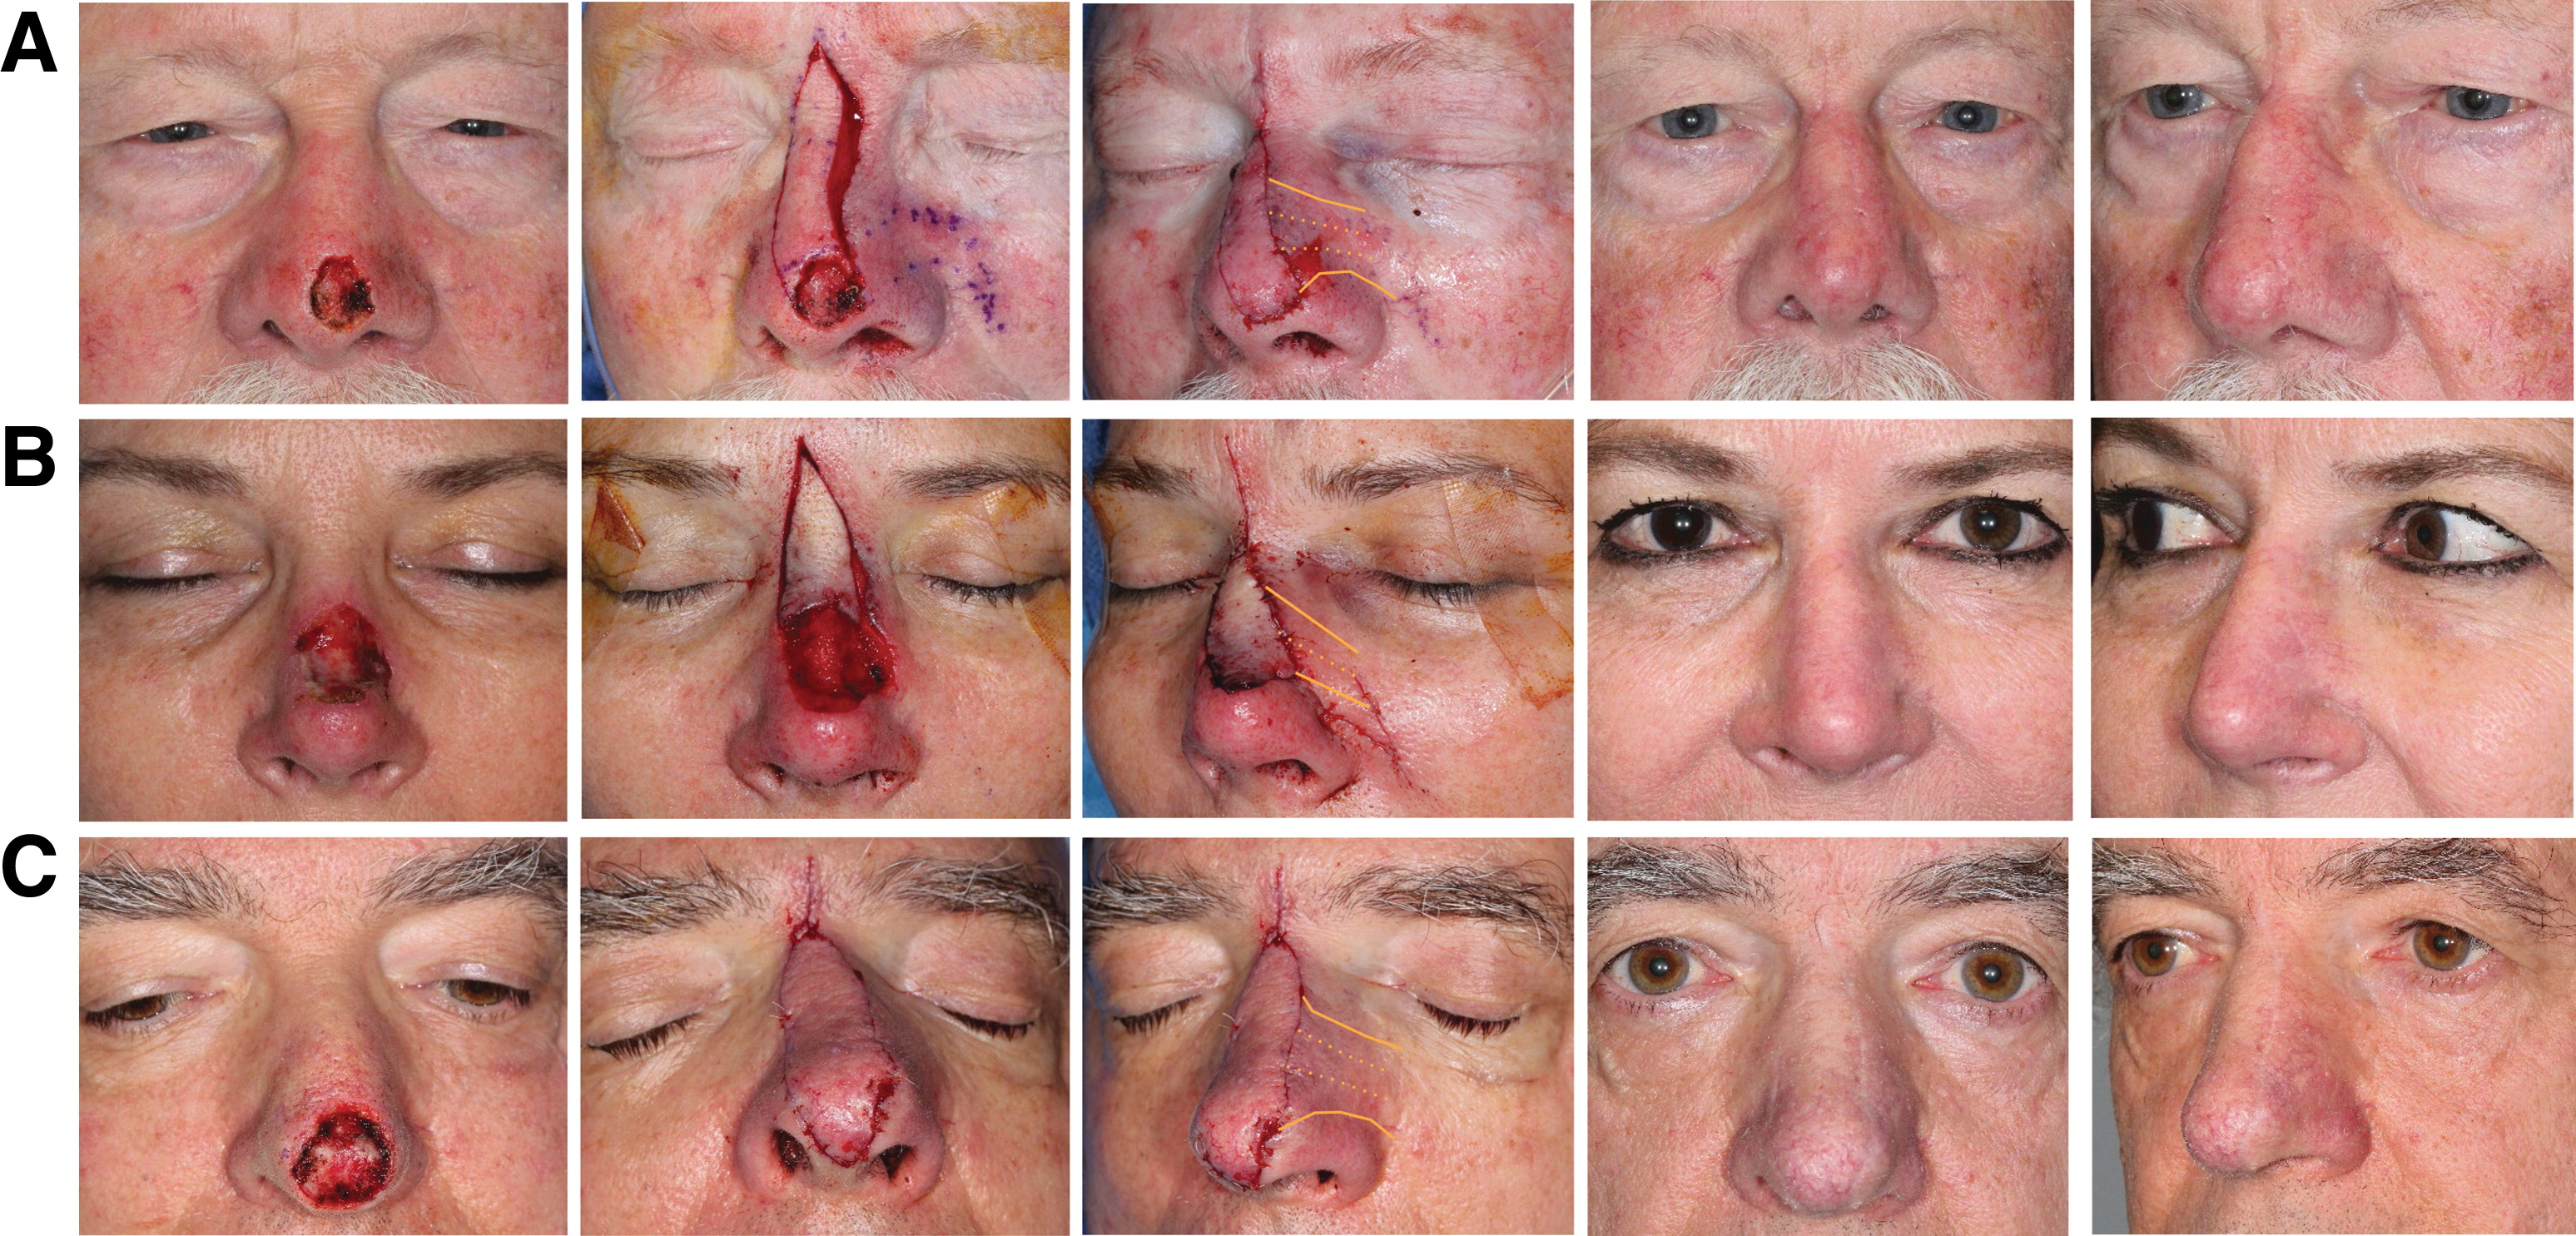 Superior Extended Nasal Myocutaneous Island Flap: An Alternative to Forehead Flap Reconstruction of the Nose